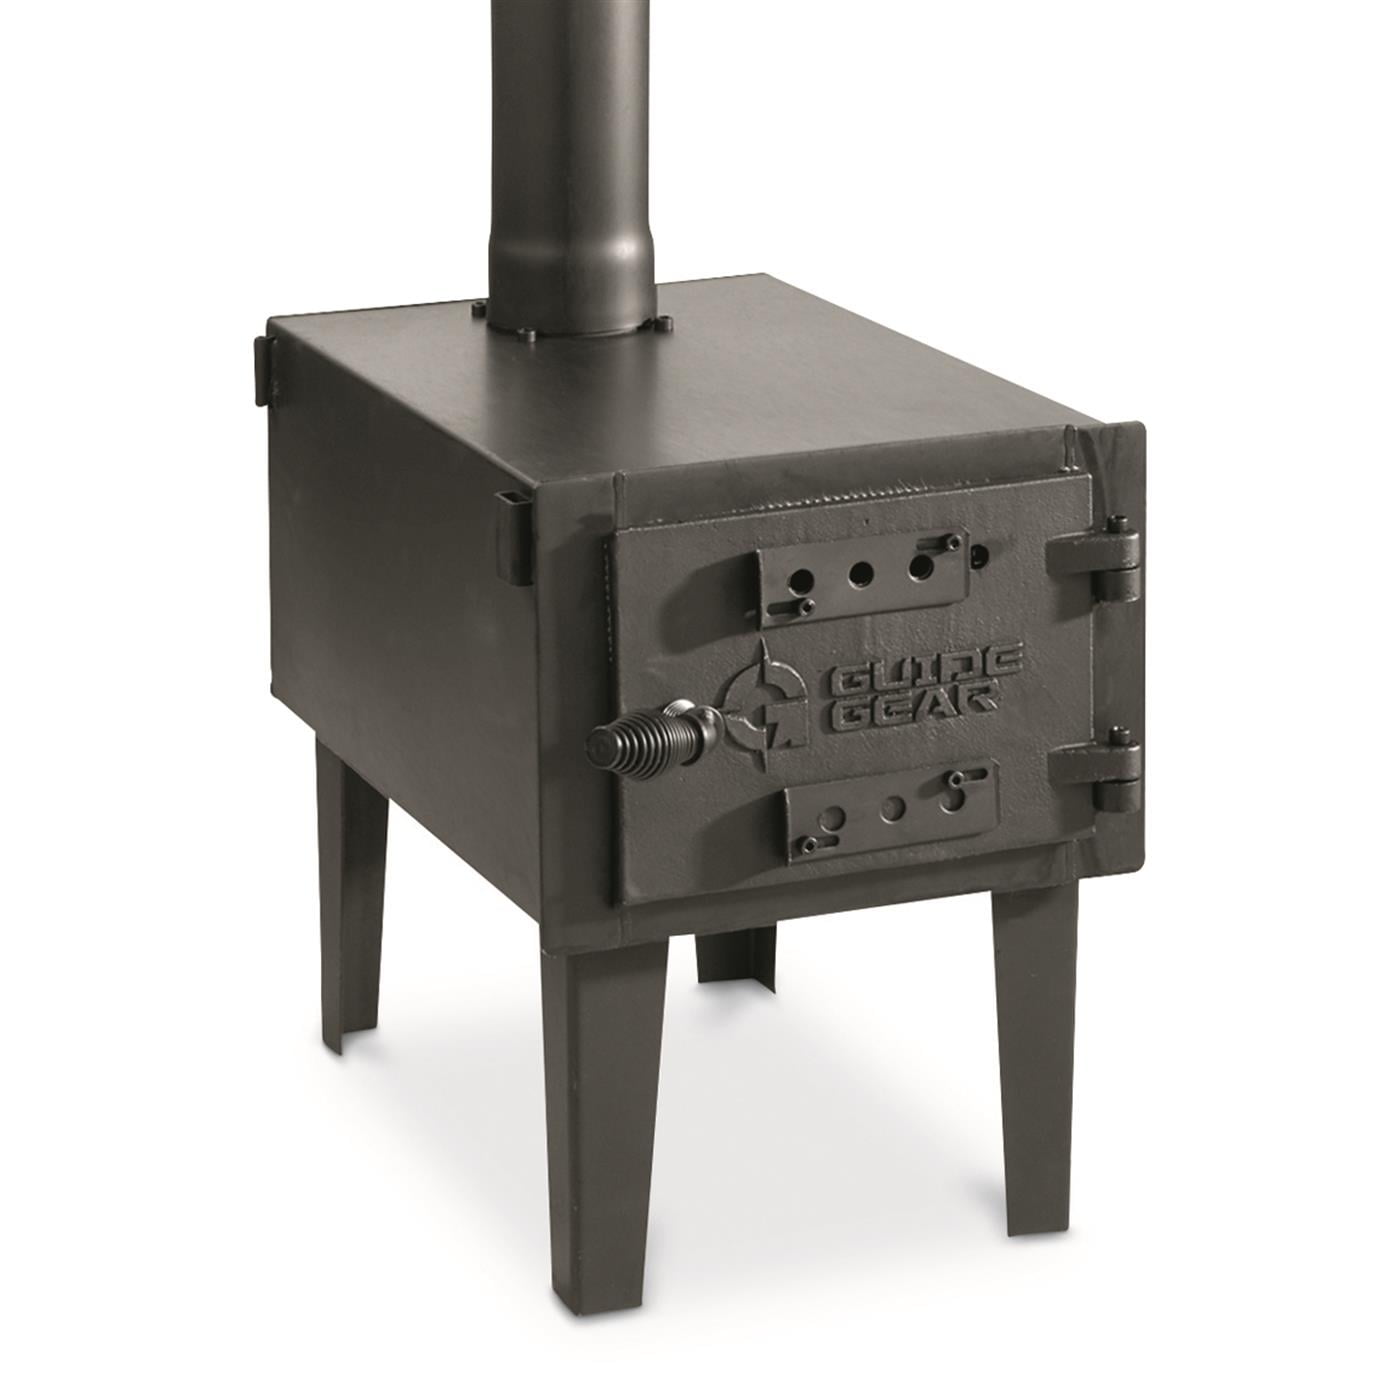 Outdoor Wood Burning Stove, Portable with Chimney Pipe for Cooking,  Camping, Tent, Hiking, Fishing, Backpacking